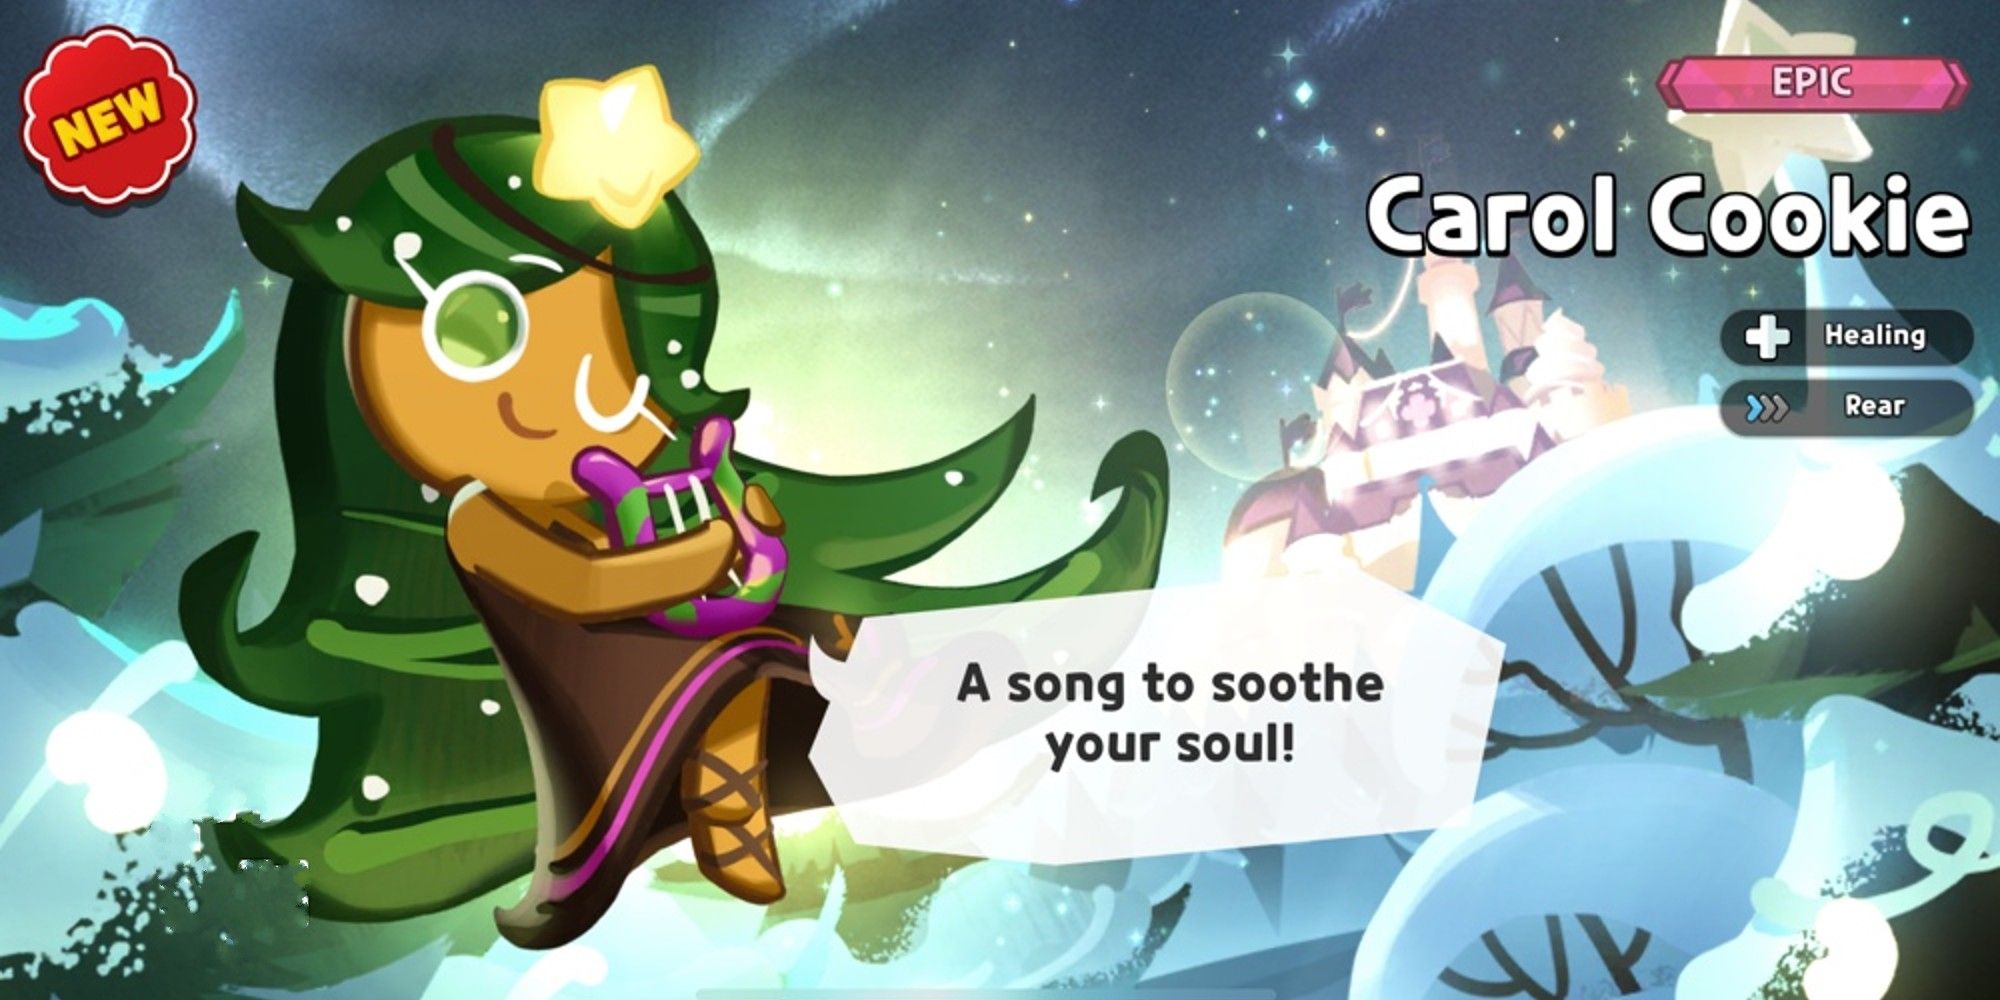 carol cookie plays her lyre while dancing among the pines